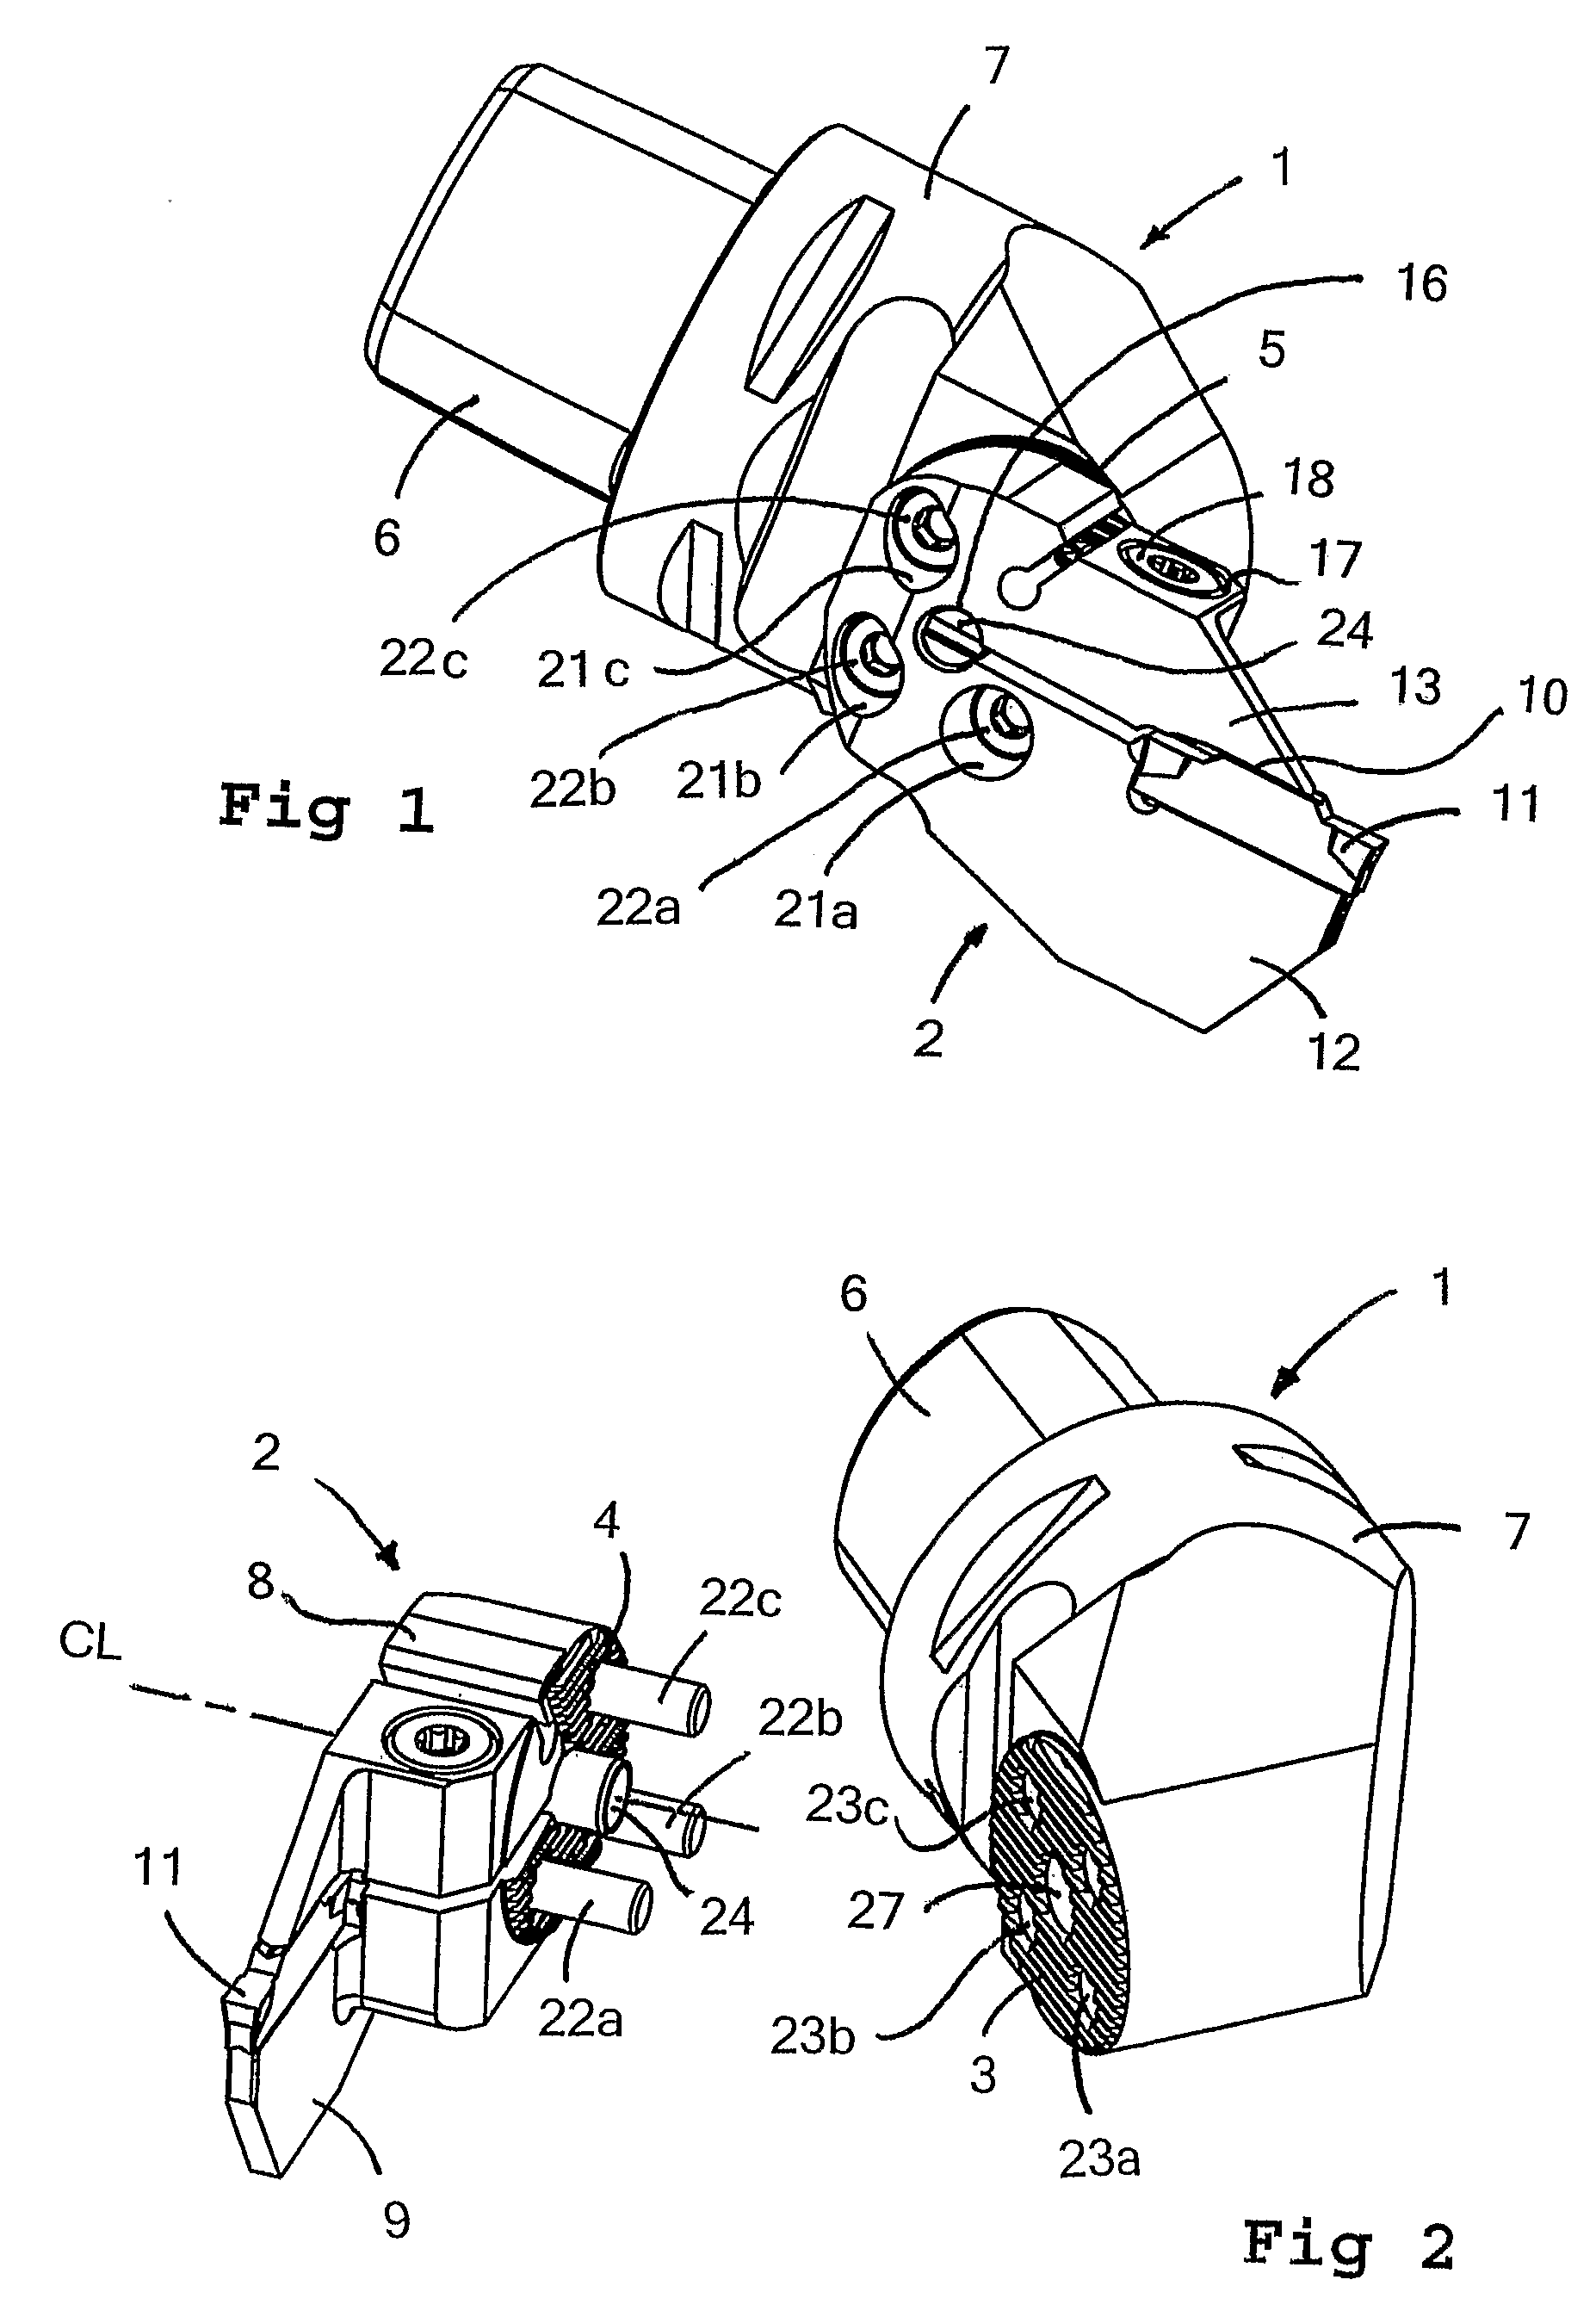 Cutting tool and associated tool head